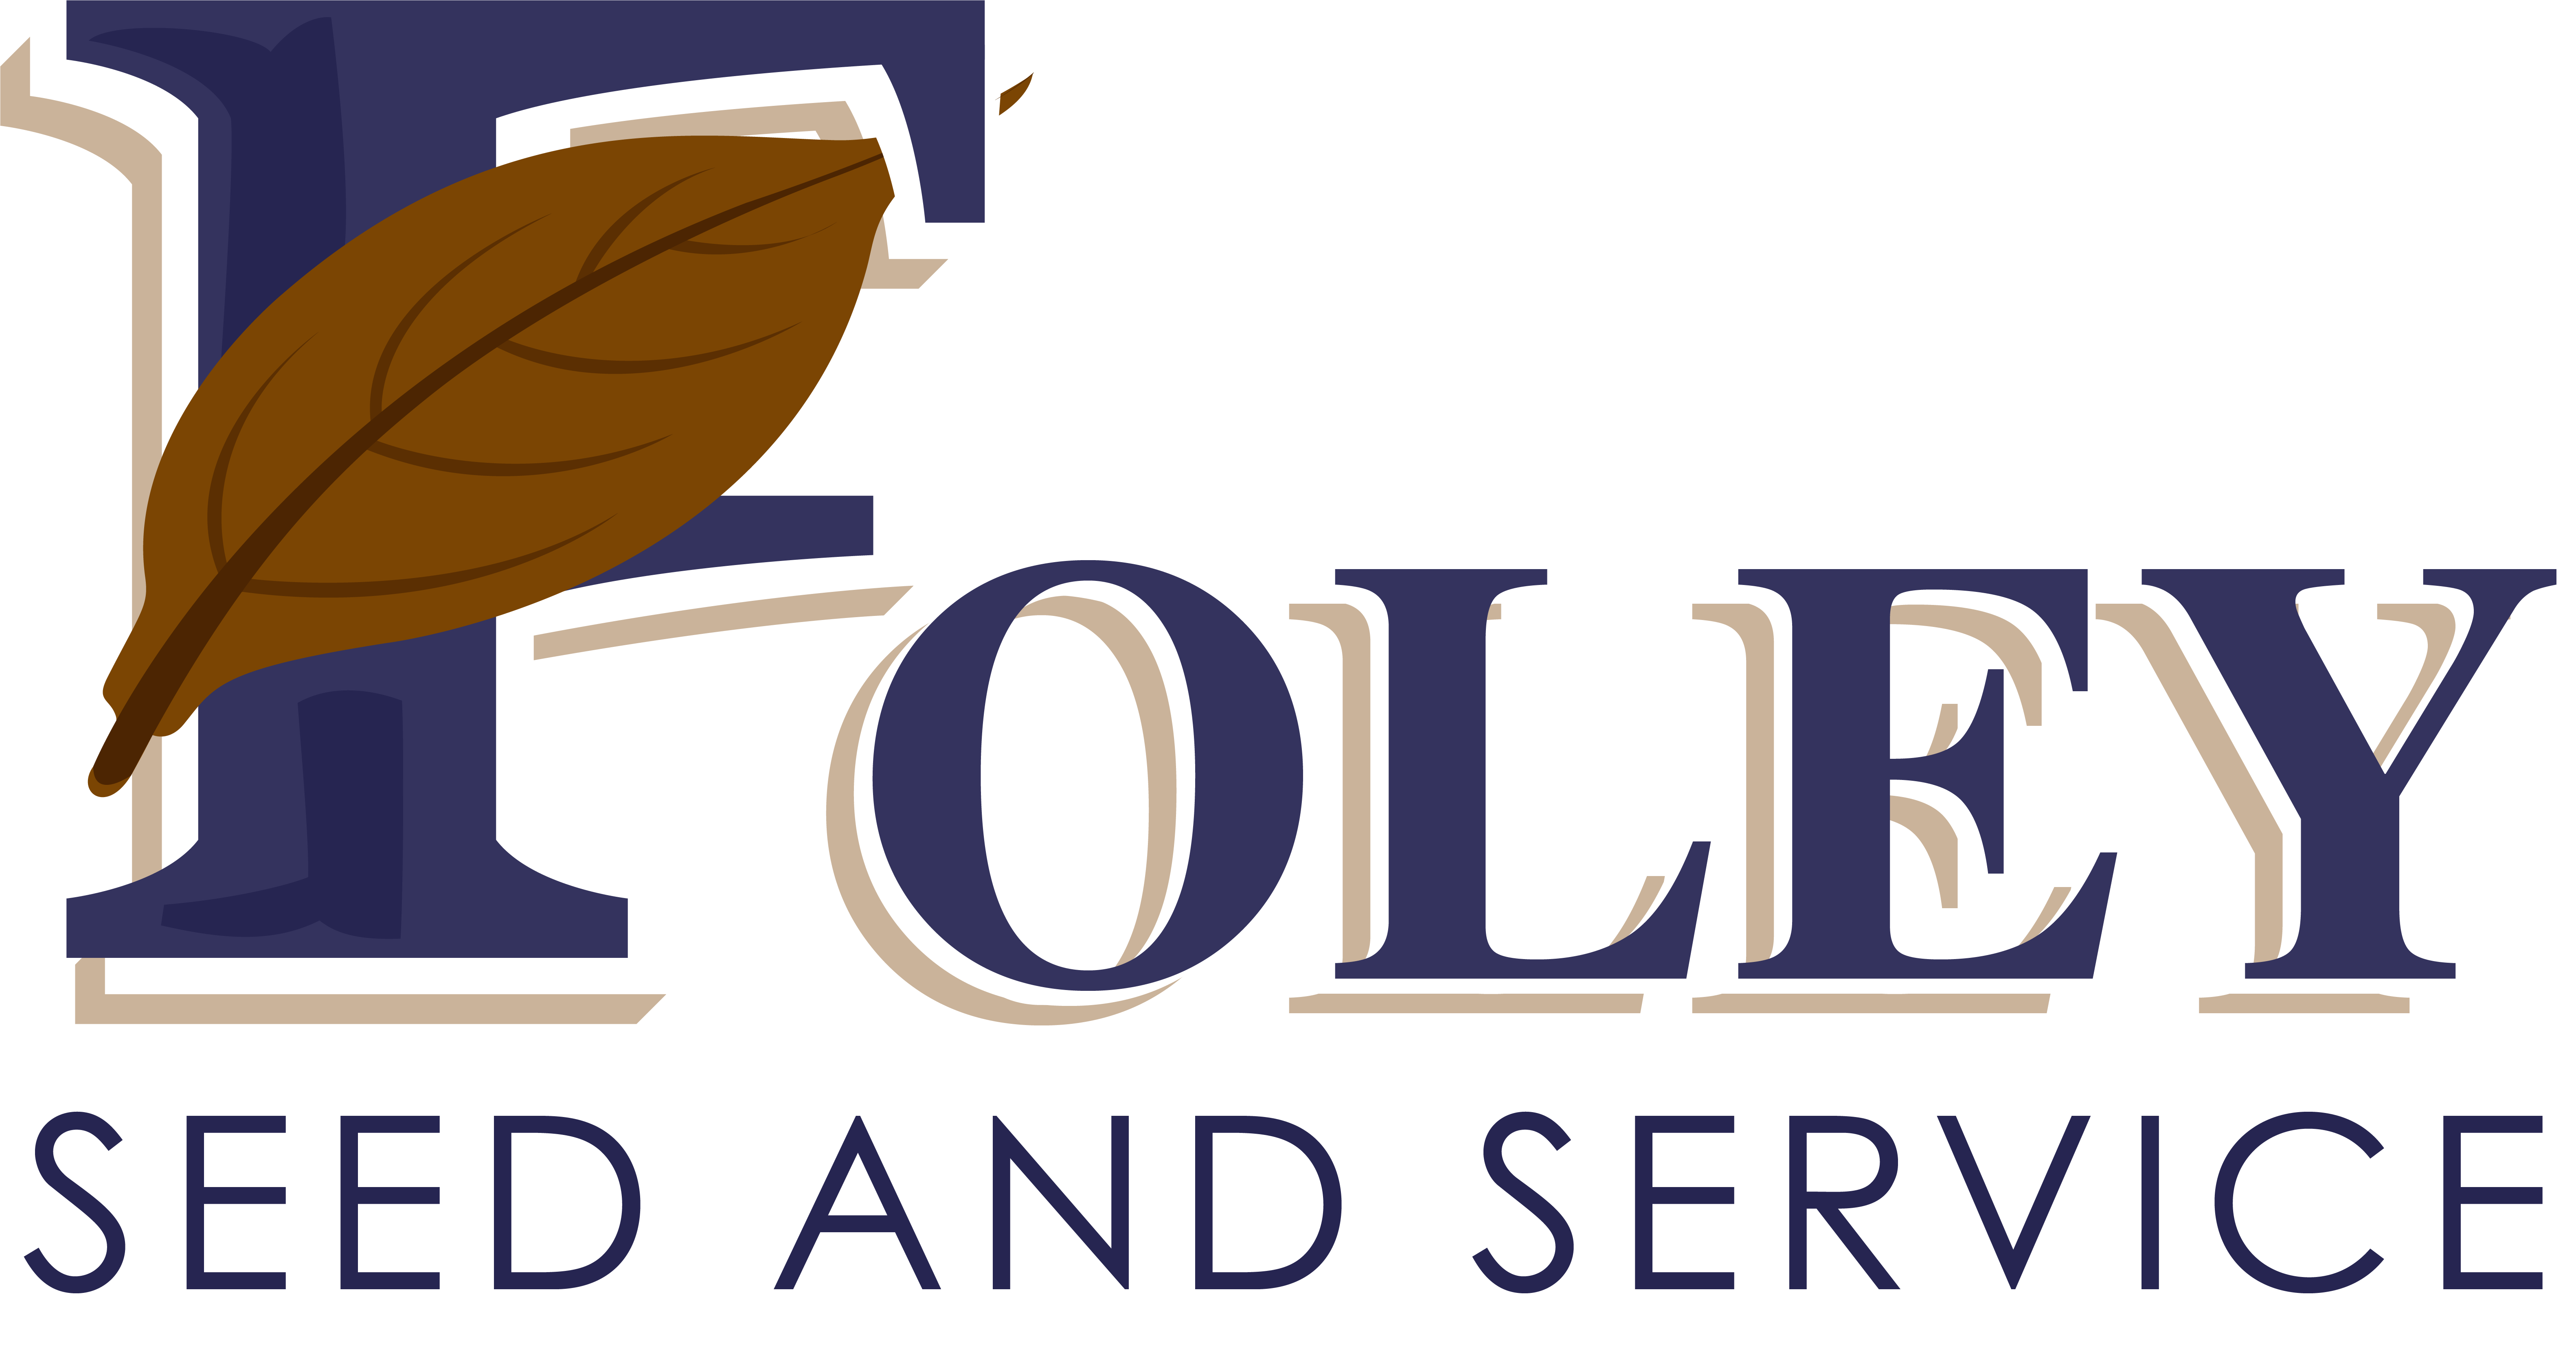 Foley Seed and Service